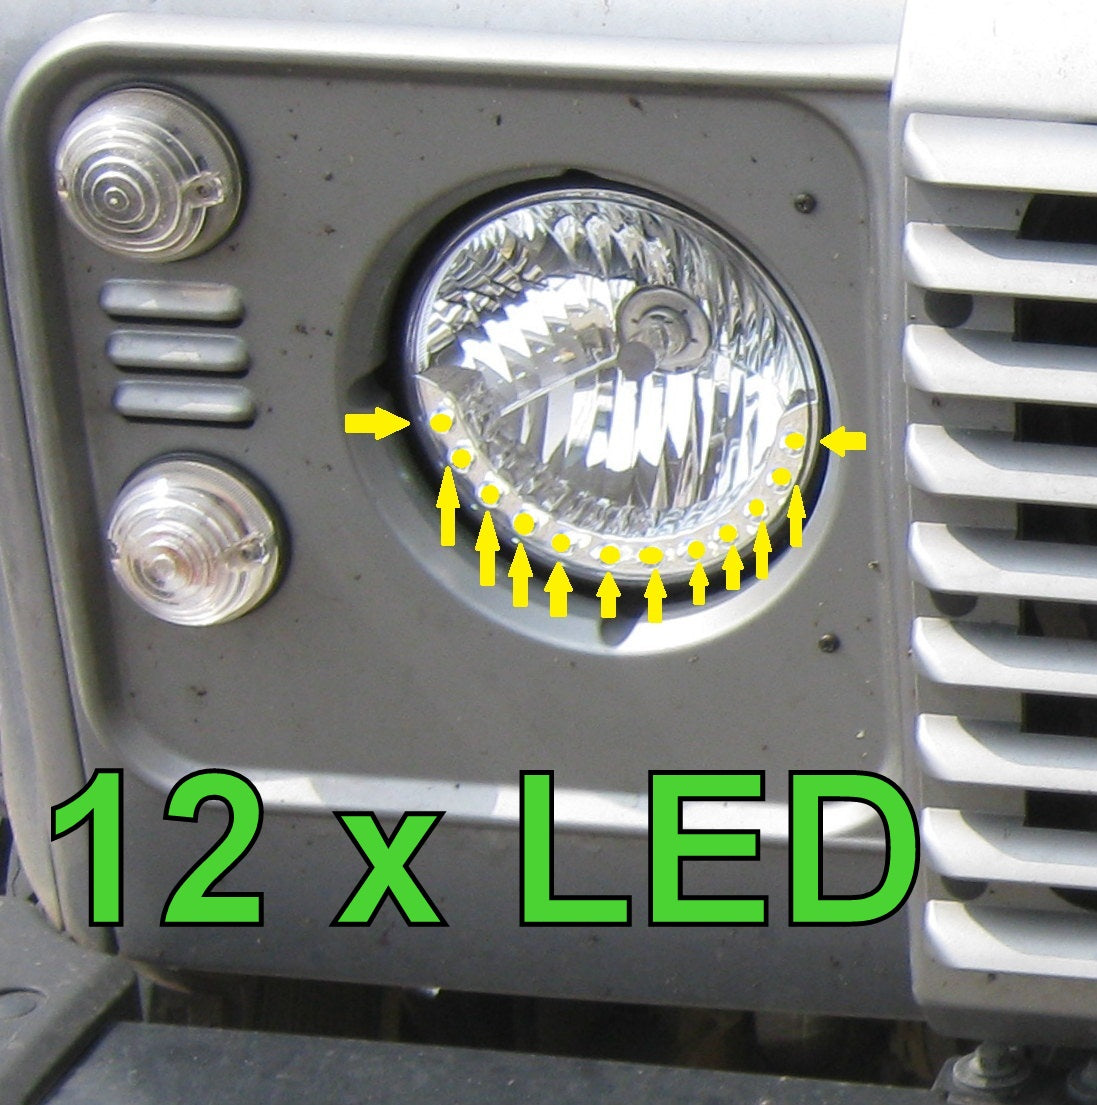 7" Halogen Headlight Upgrade kit - LED DRL Style - for Land Rover Series 1 2 3 - RHD